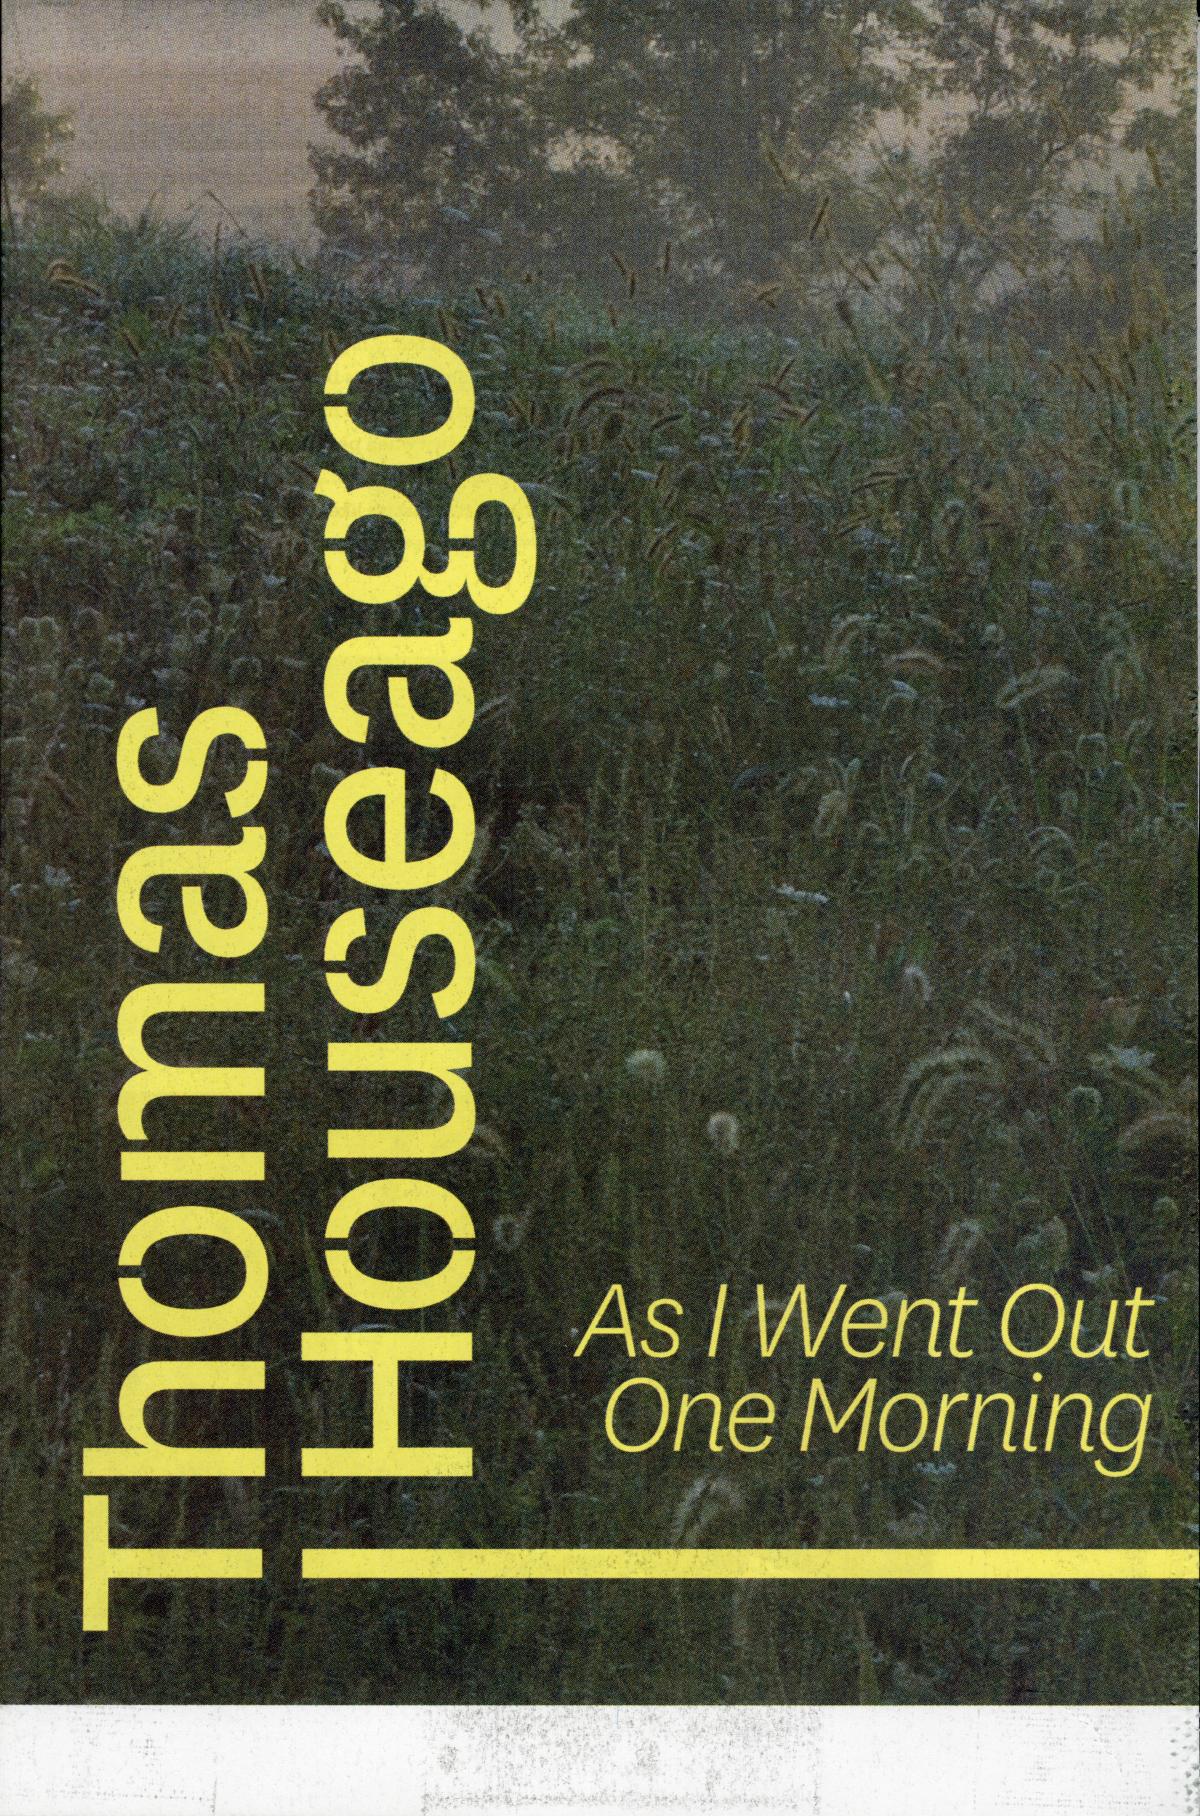 Thomas Houseago, As I went Out One Morning, May 4 – November 11, 2013, exhibition catalogue